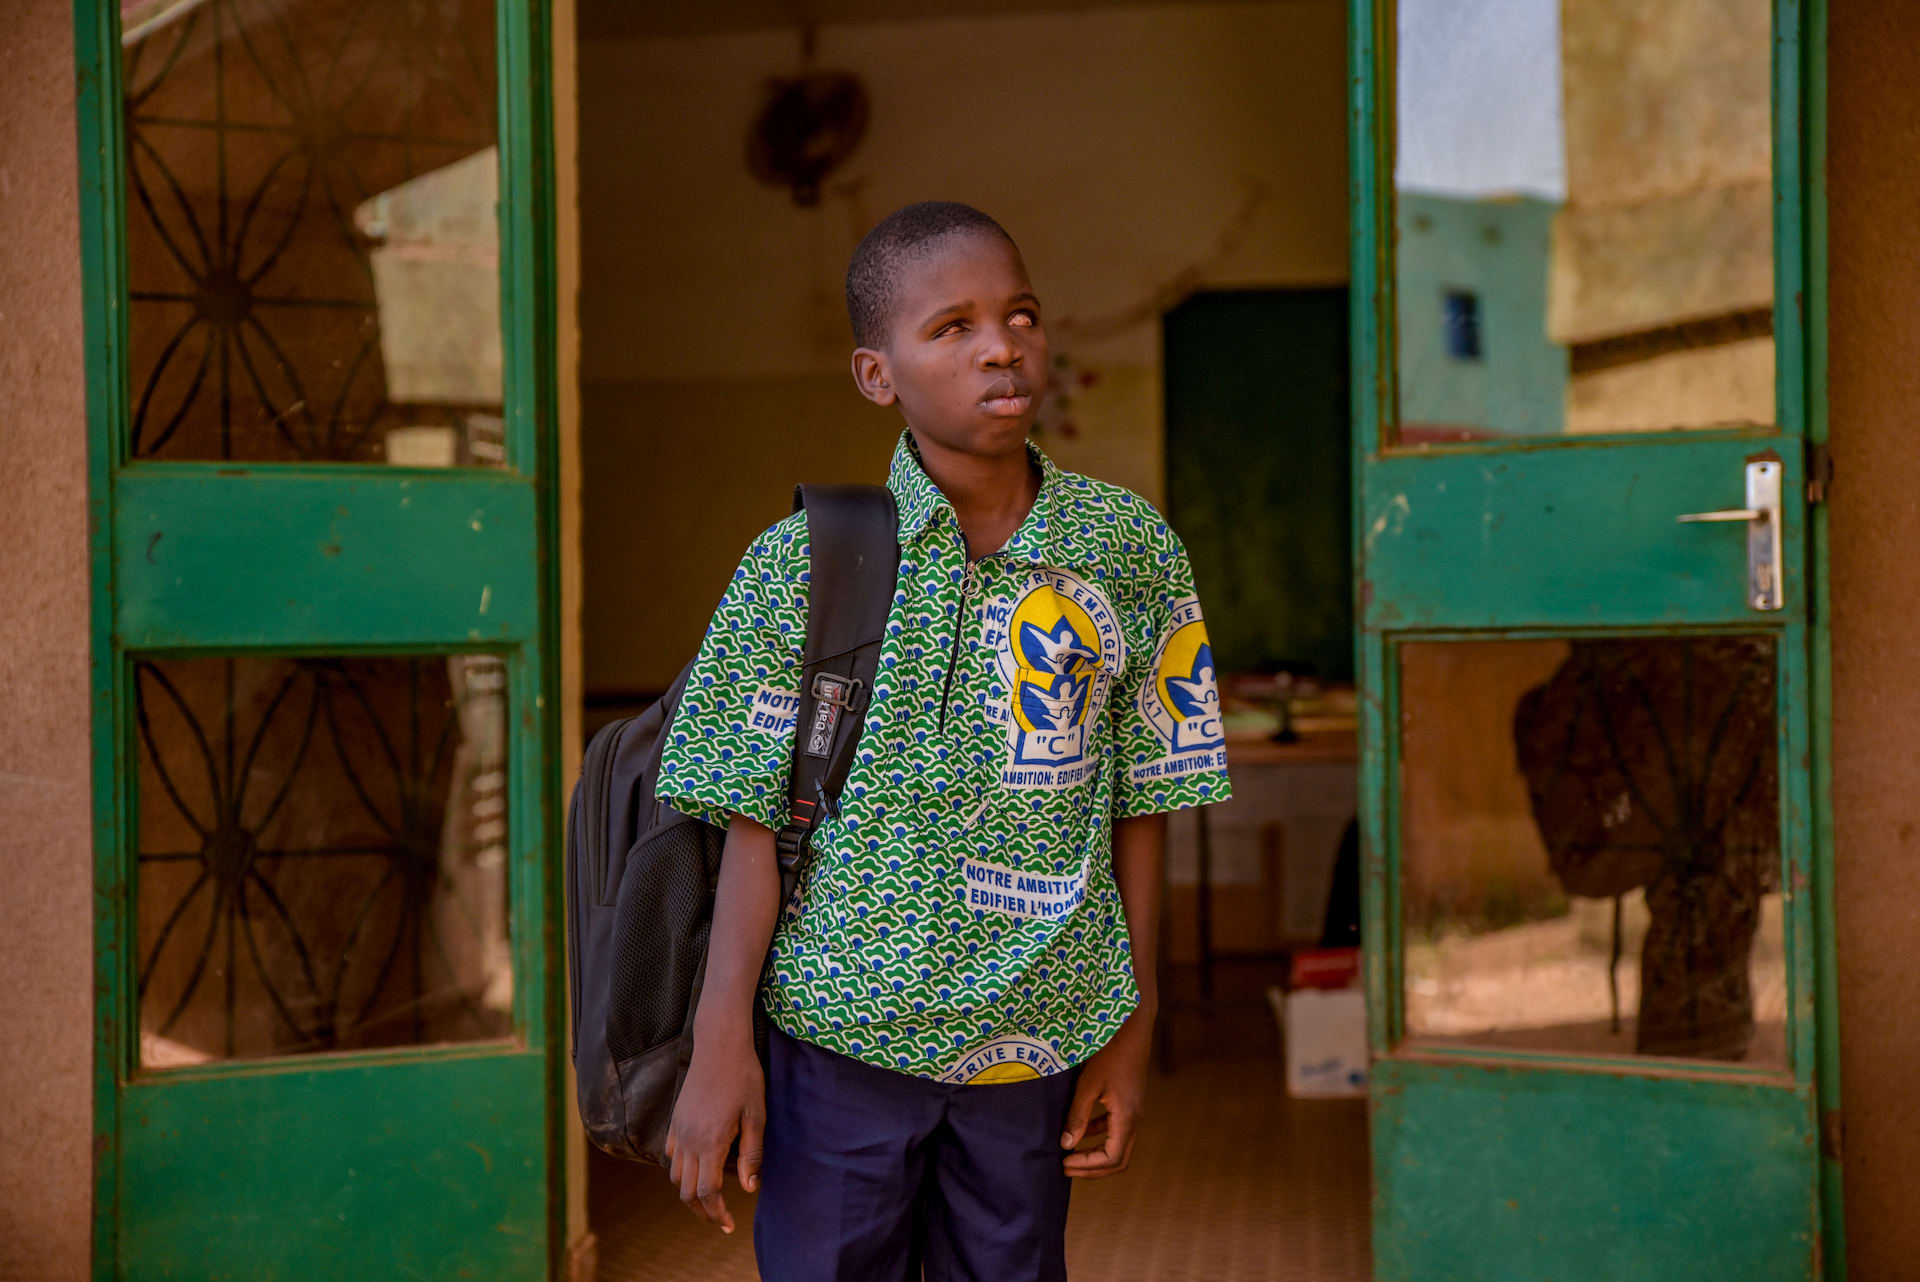 Kader is wearing a blue, white, and green patterned shirt and is holding a black back pack. He is standing in front of his classroom. The building is brown and the doors are green.